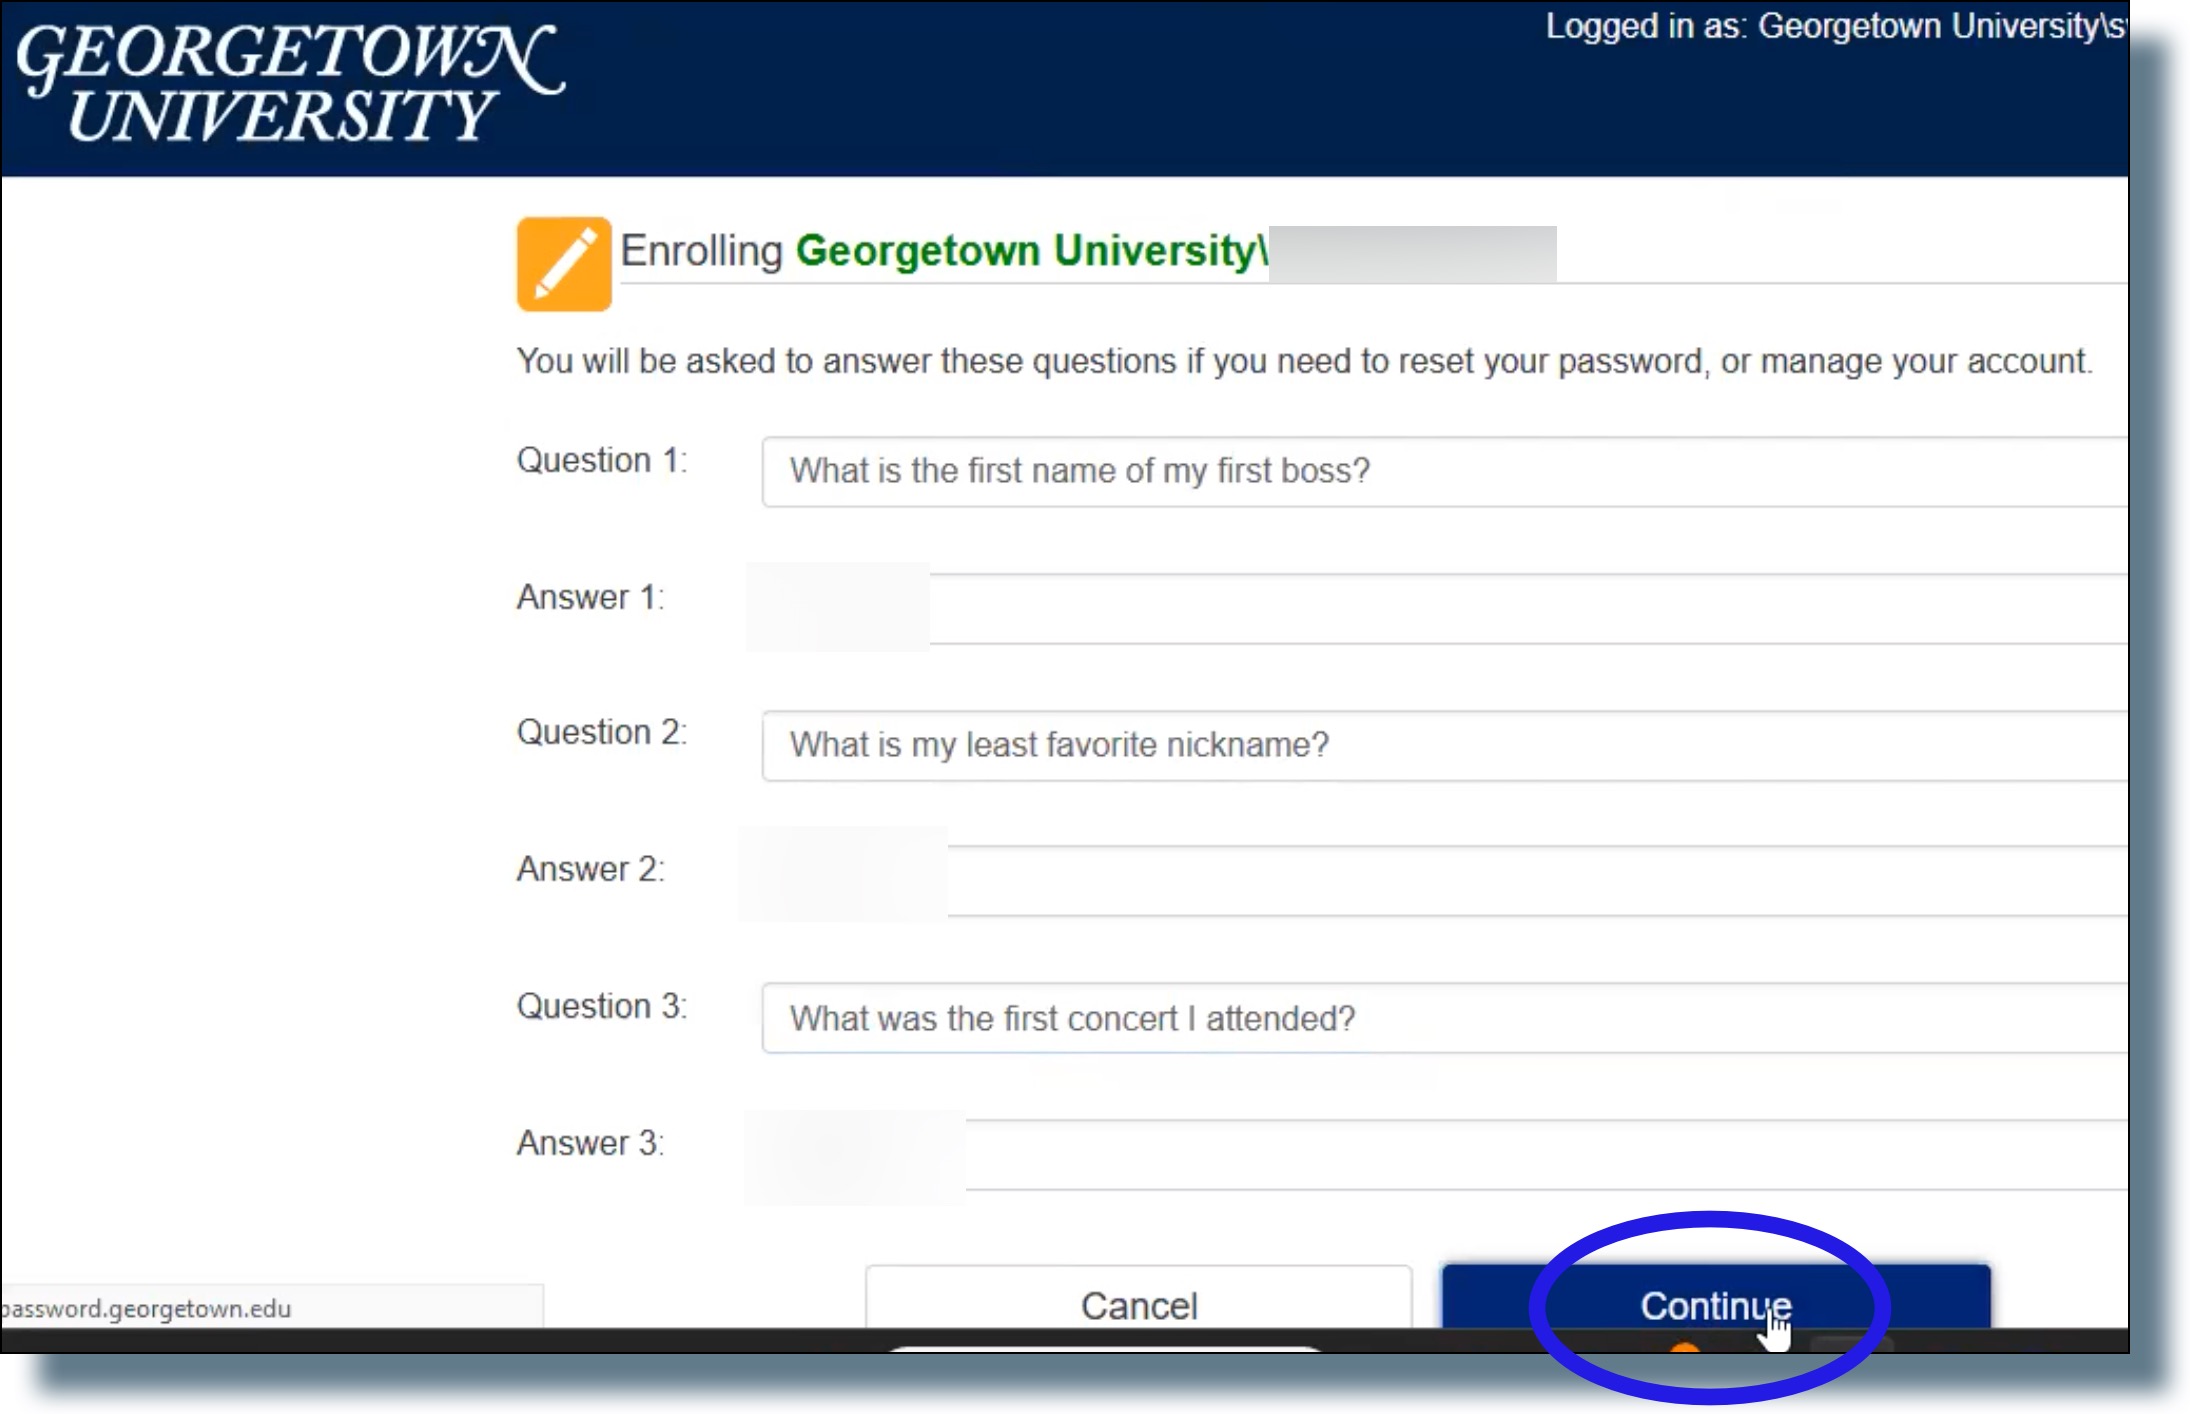 Select, and then provide answers for, any 3 security questions available, then click 'Continue'.